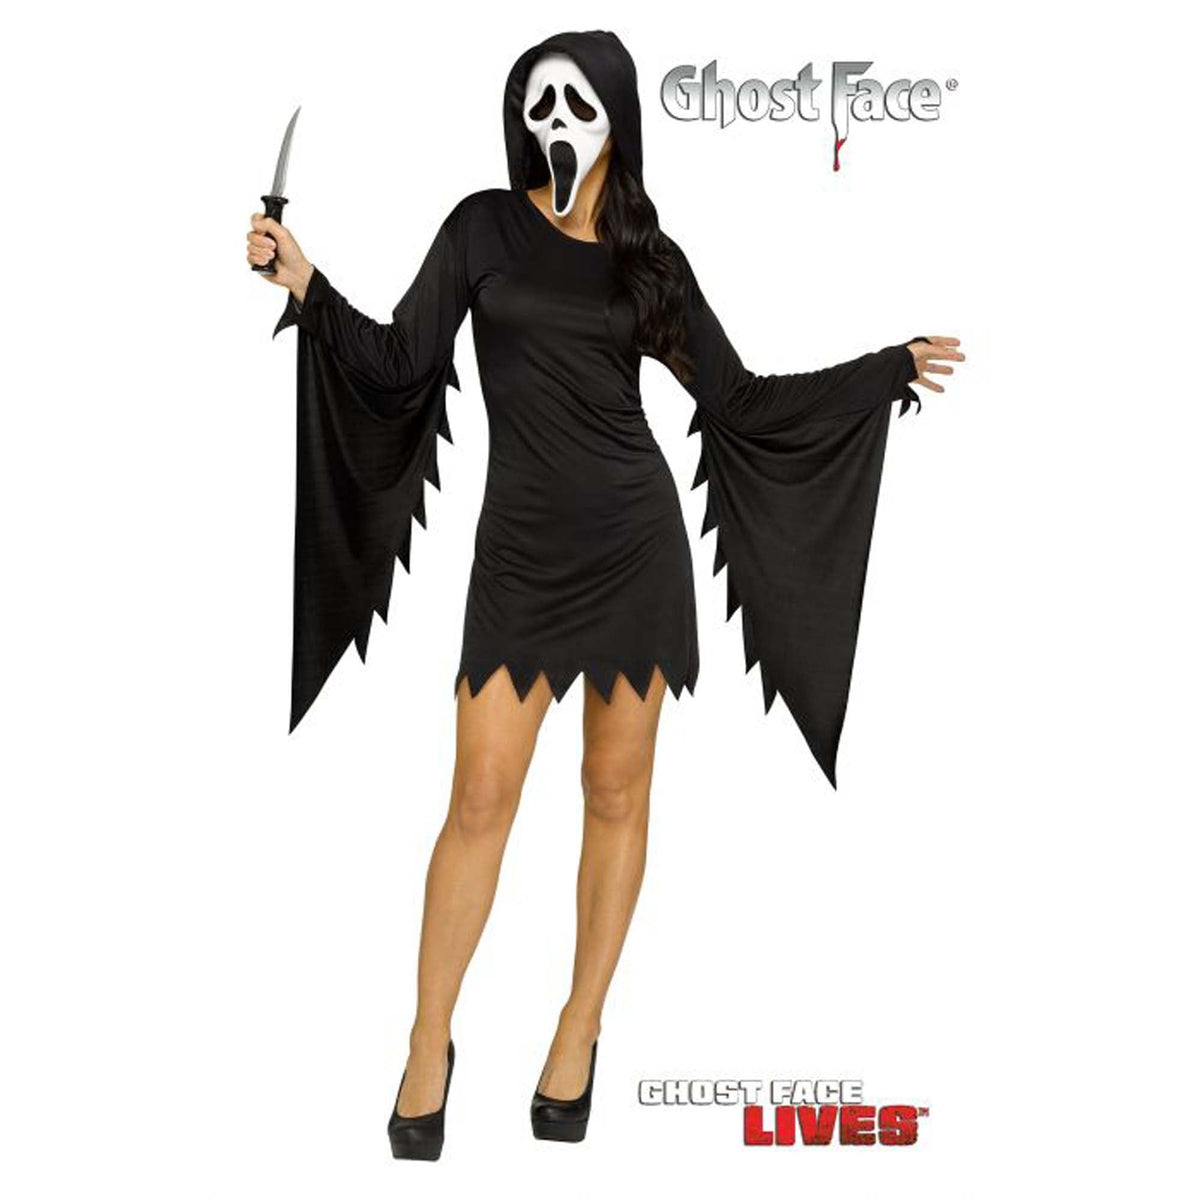 FUN WORLD Costumes Scream Ghostface Glamour Costume for Adults, Black Hooded Dress